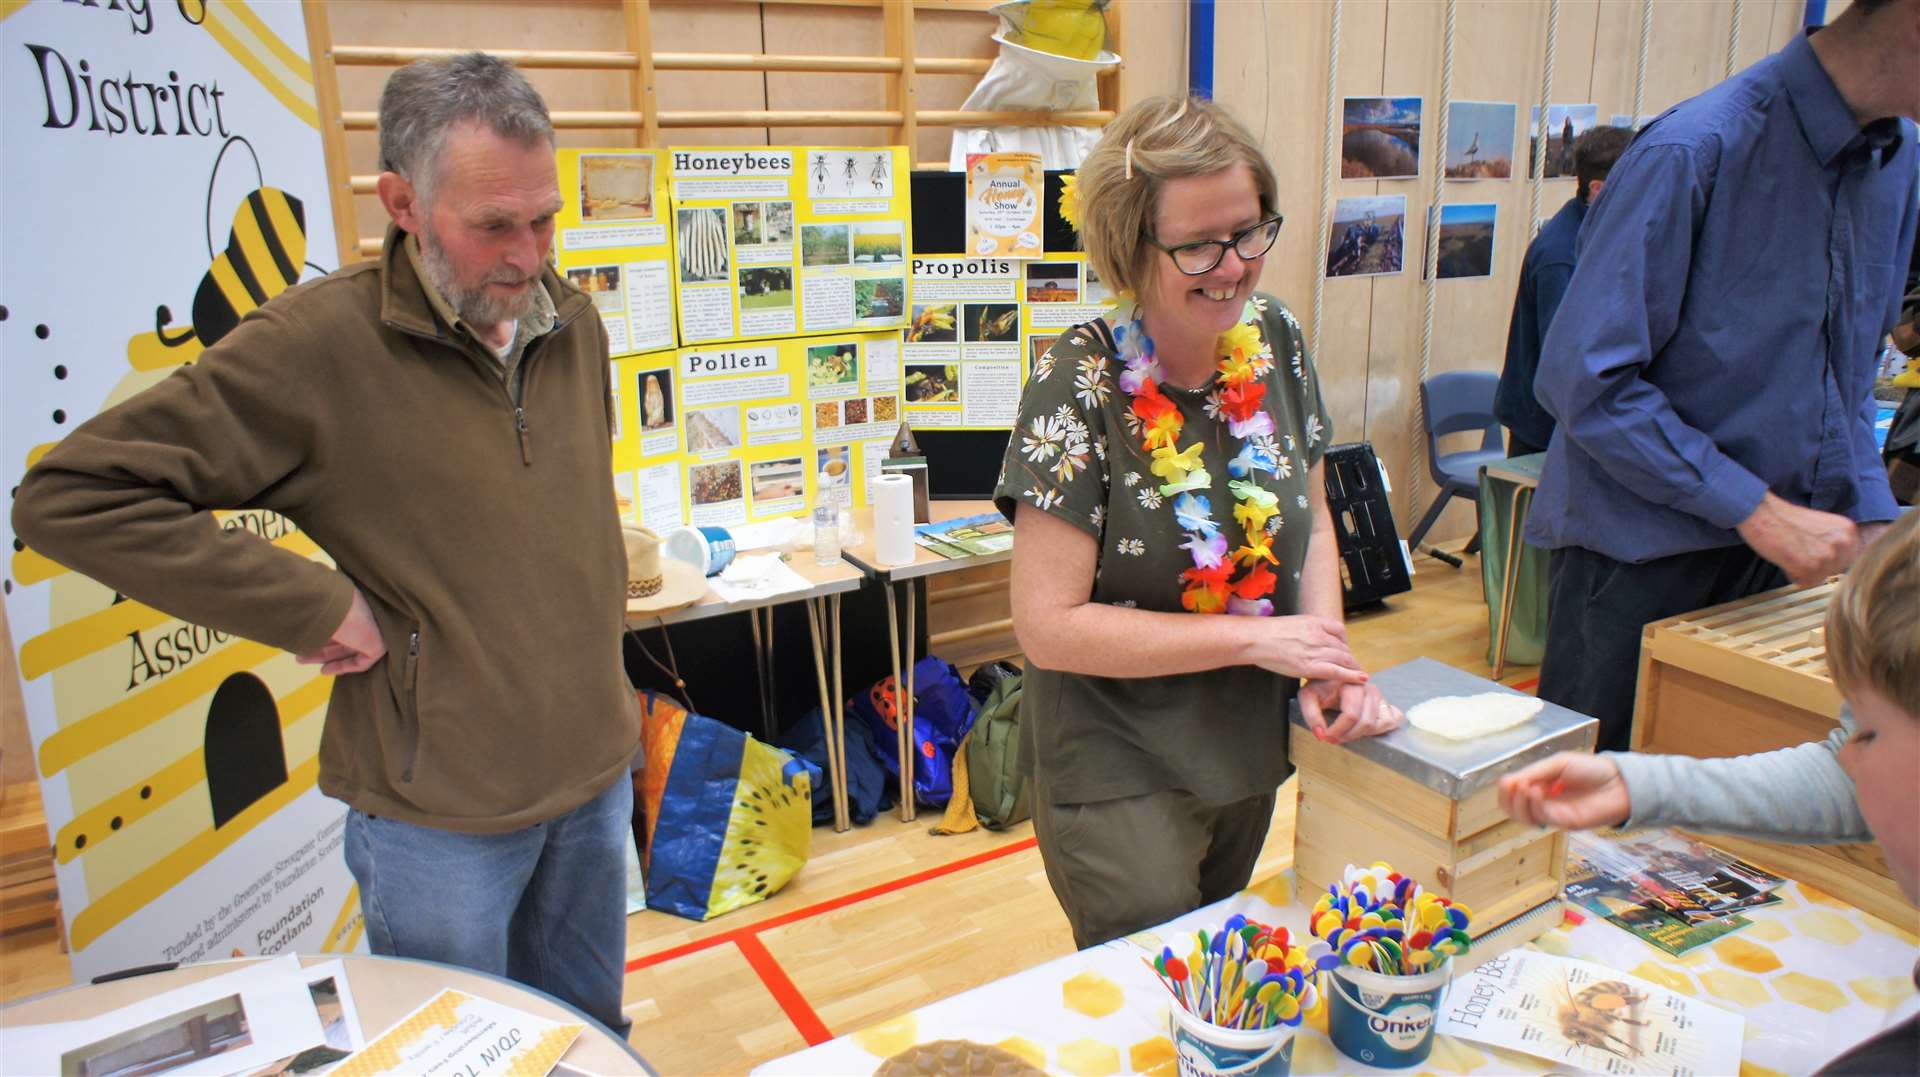 Olrig and District Beekeepers had a stand with honey to sample. Picture: DGS